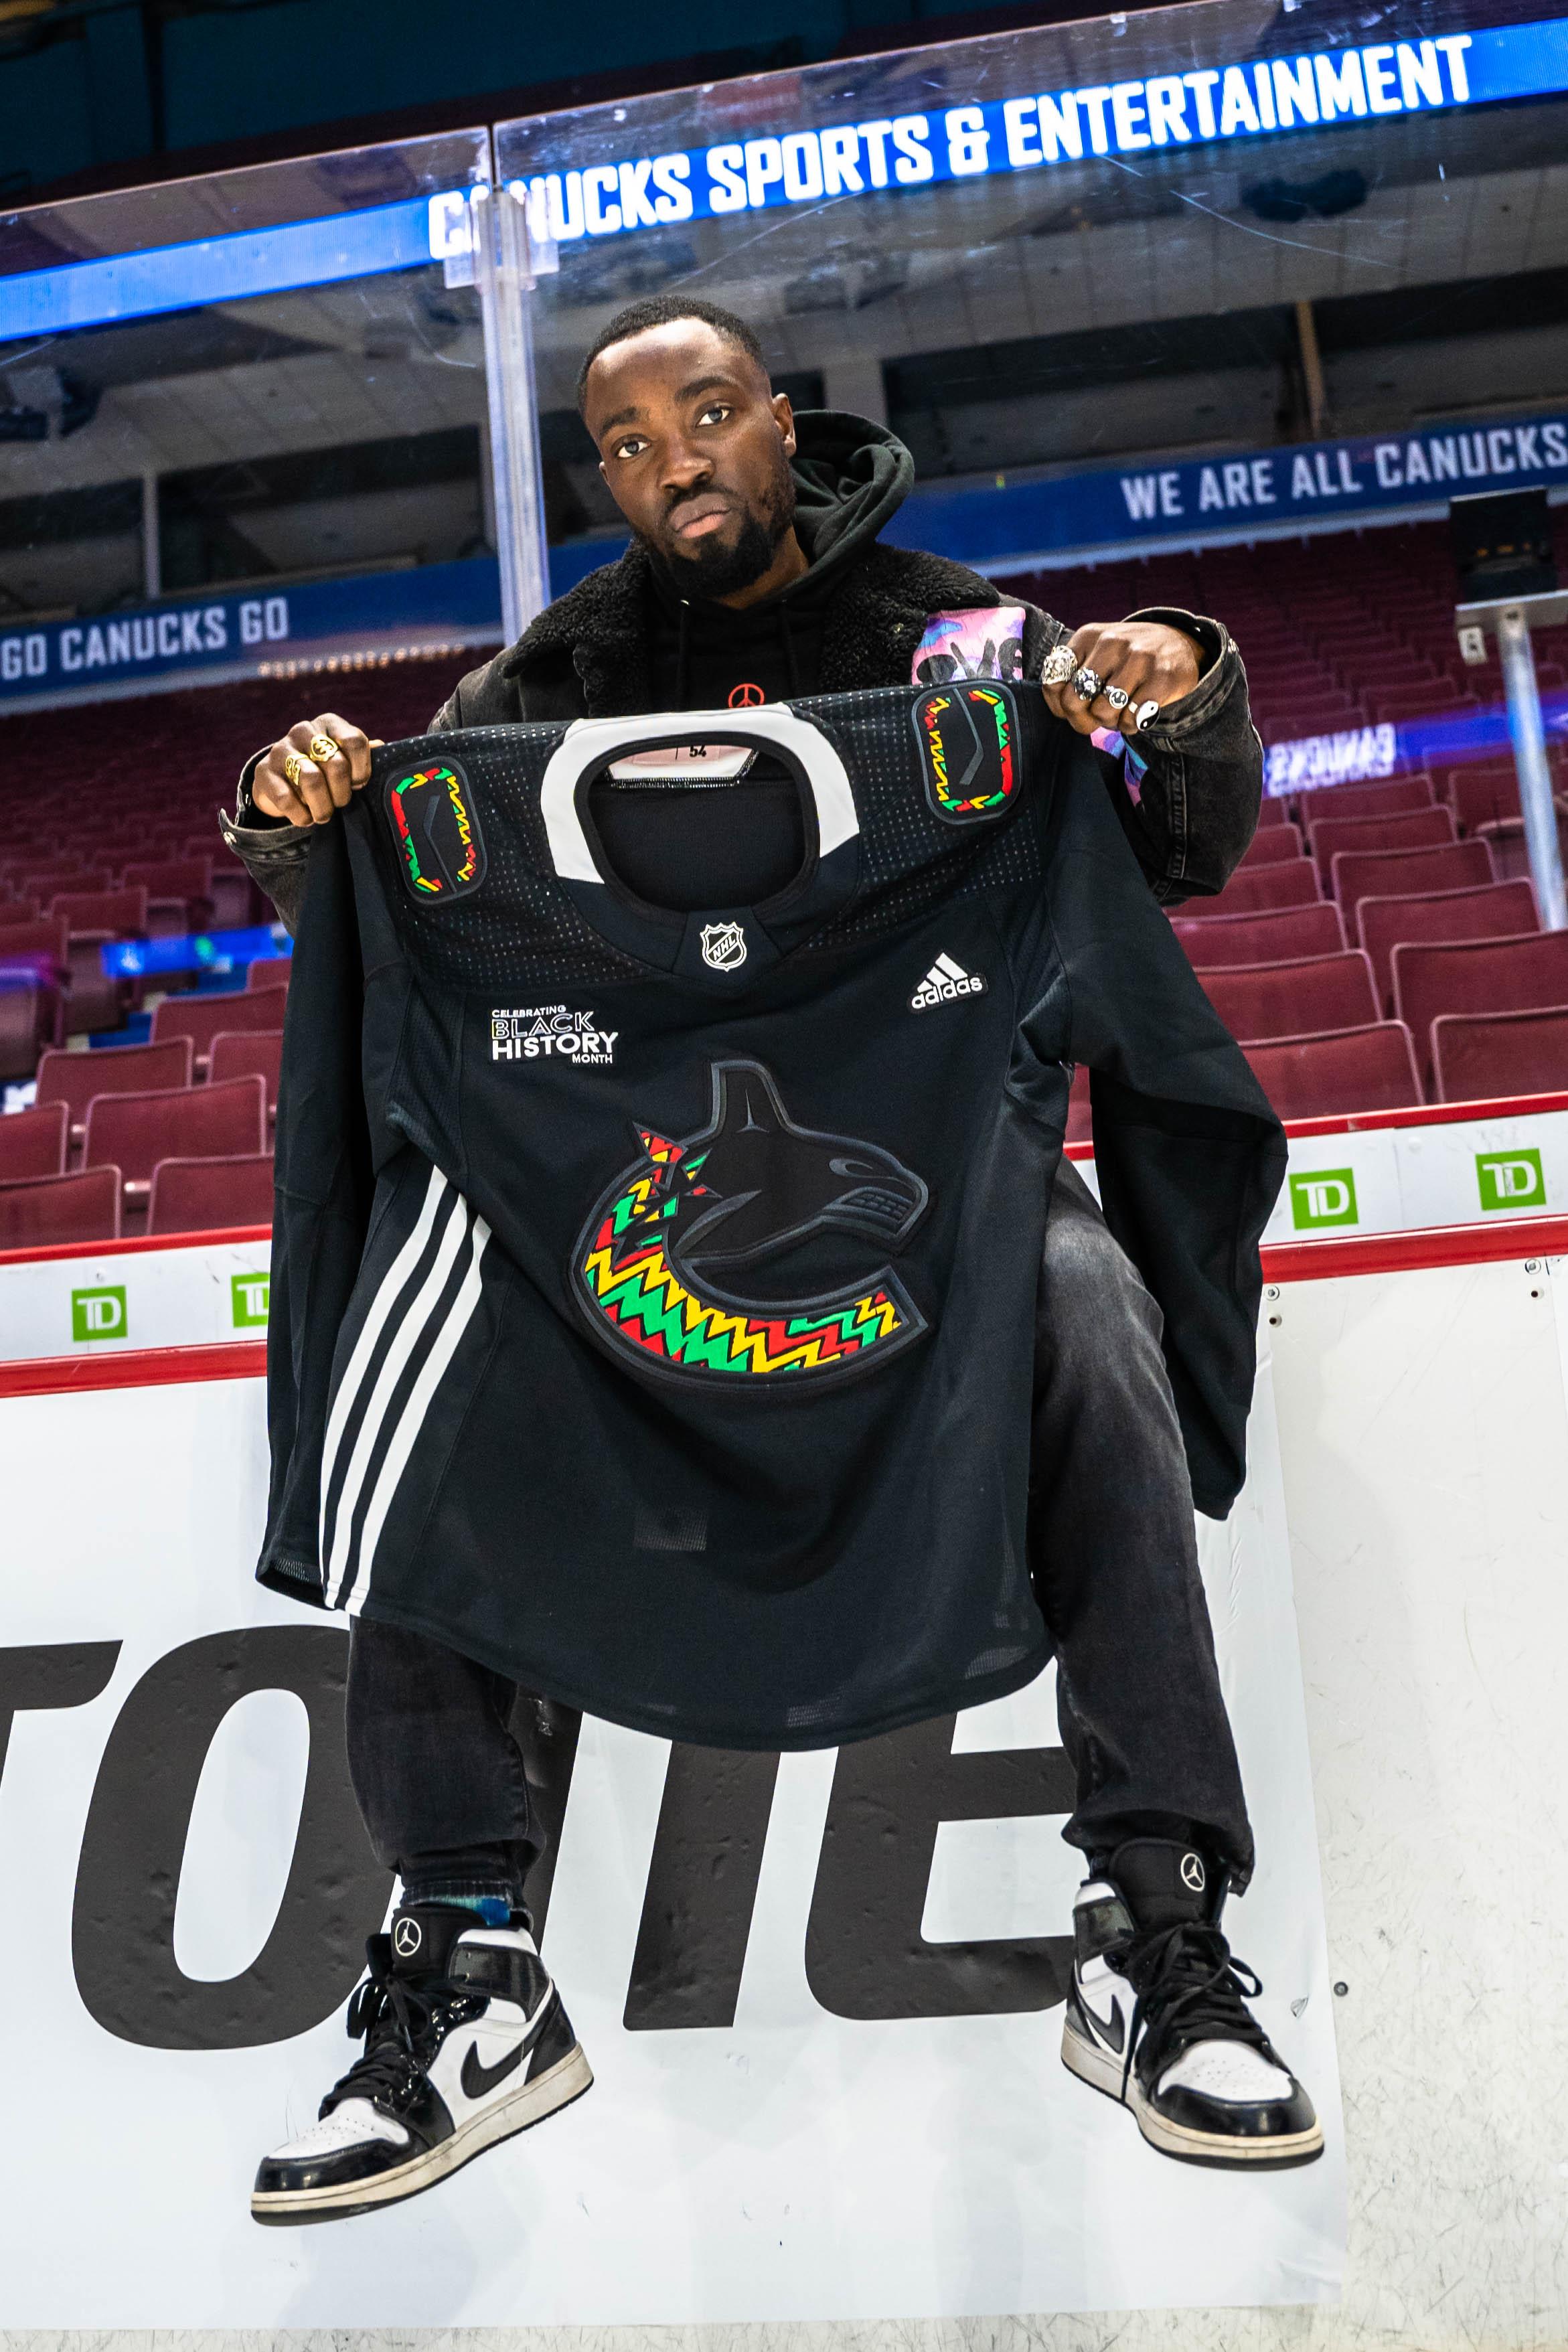 Vancouver Canucks - “I really want people to see it and feel more  included.” Local artist Jason Bempong of Sleepless Mindz Clothing&Design  shares how his Ghanaian heritage helped inspire tonight's  #BlackHistoryMonth warm